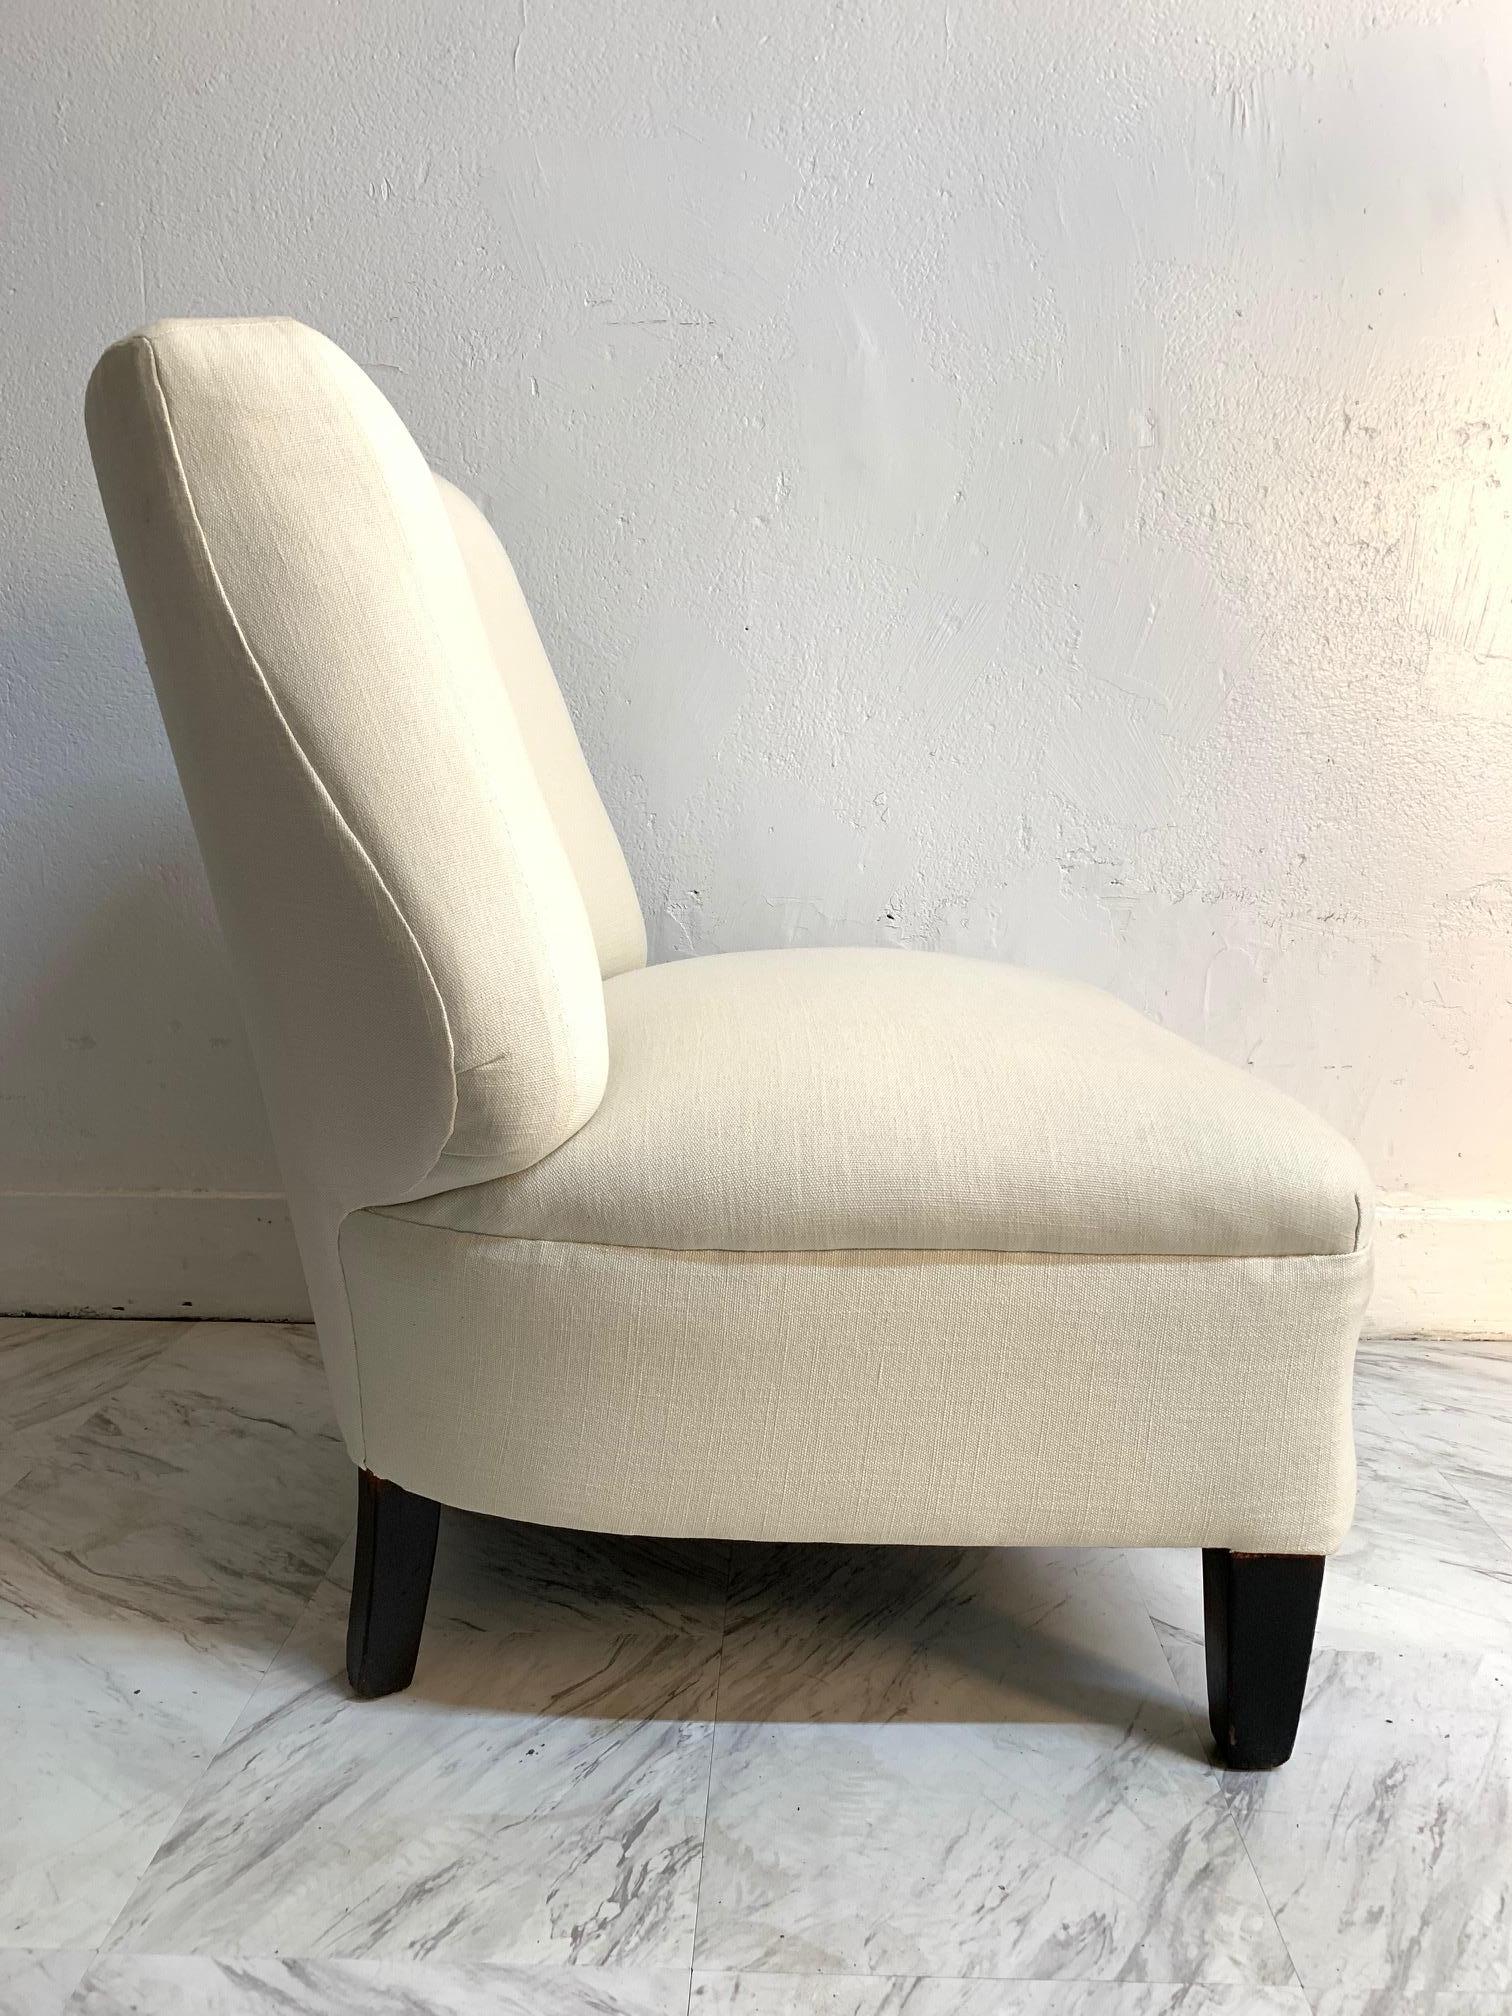 Pair of 1950s Upholstered Lounge Chairs In Good Condition For Sale In New York, NY